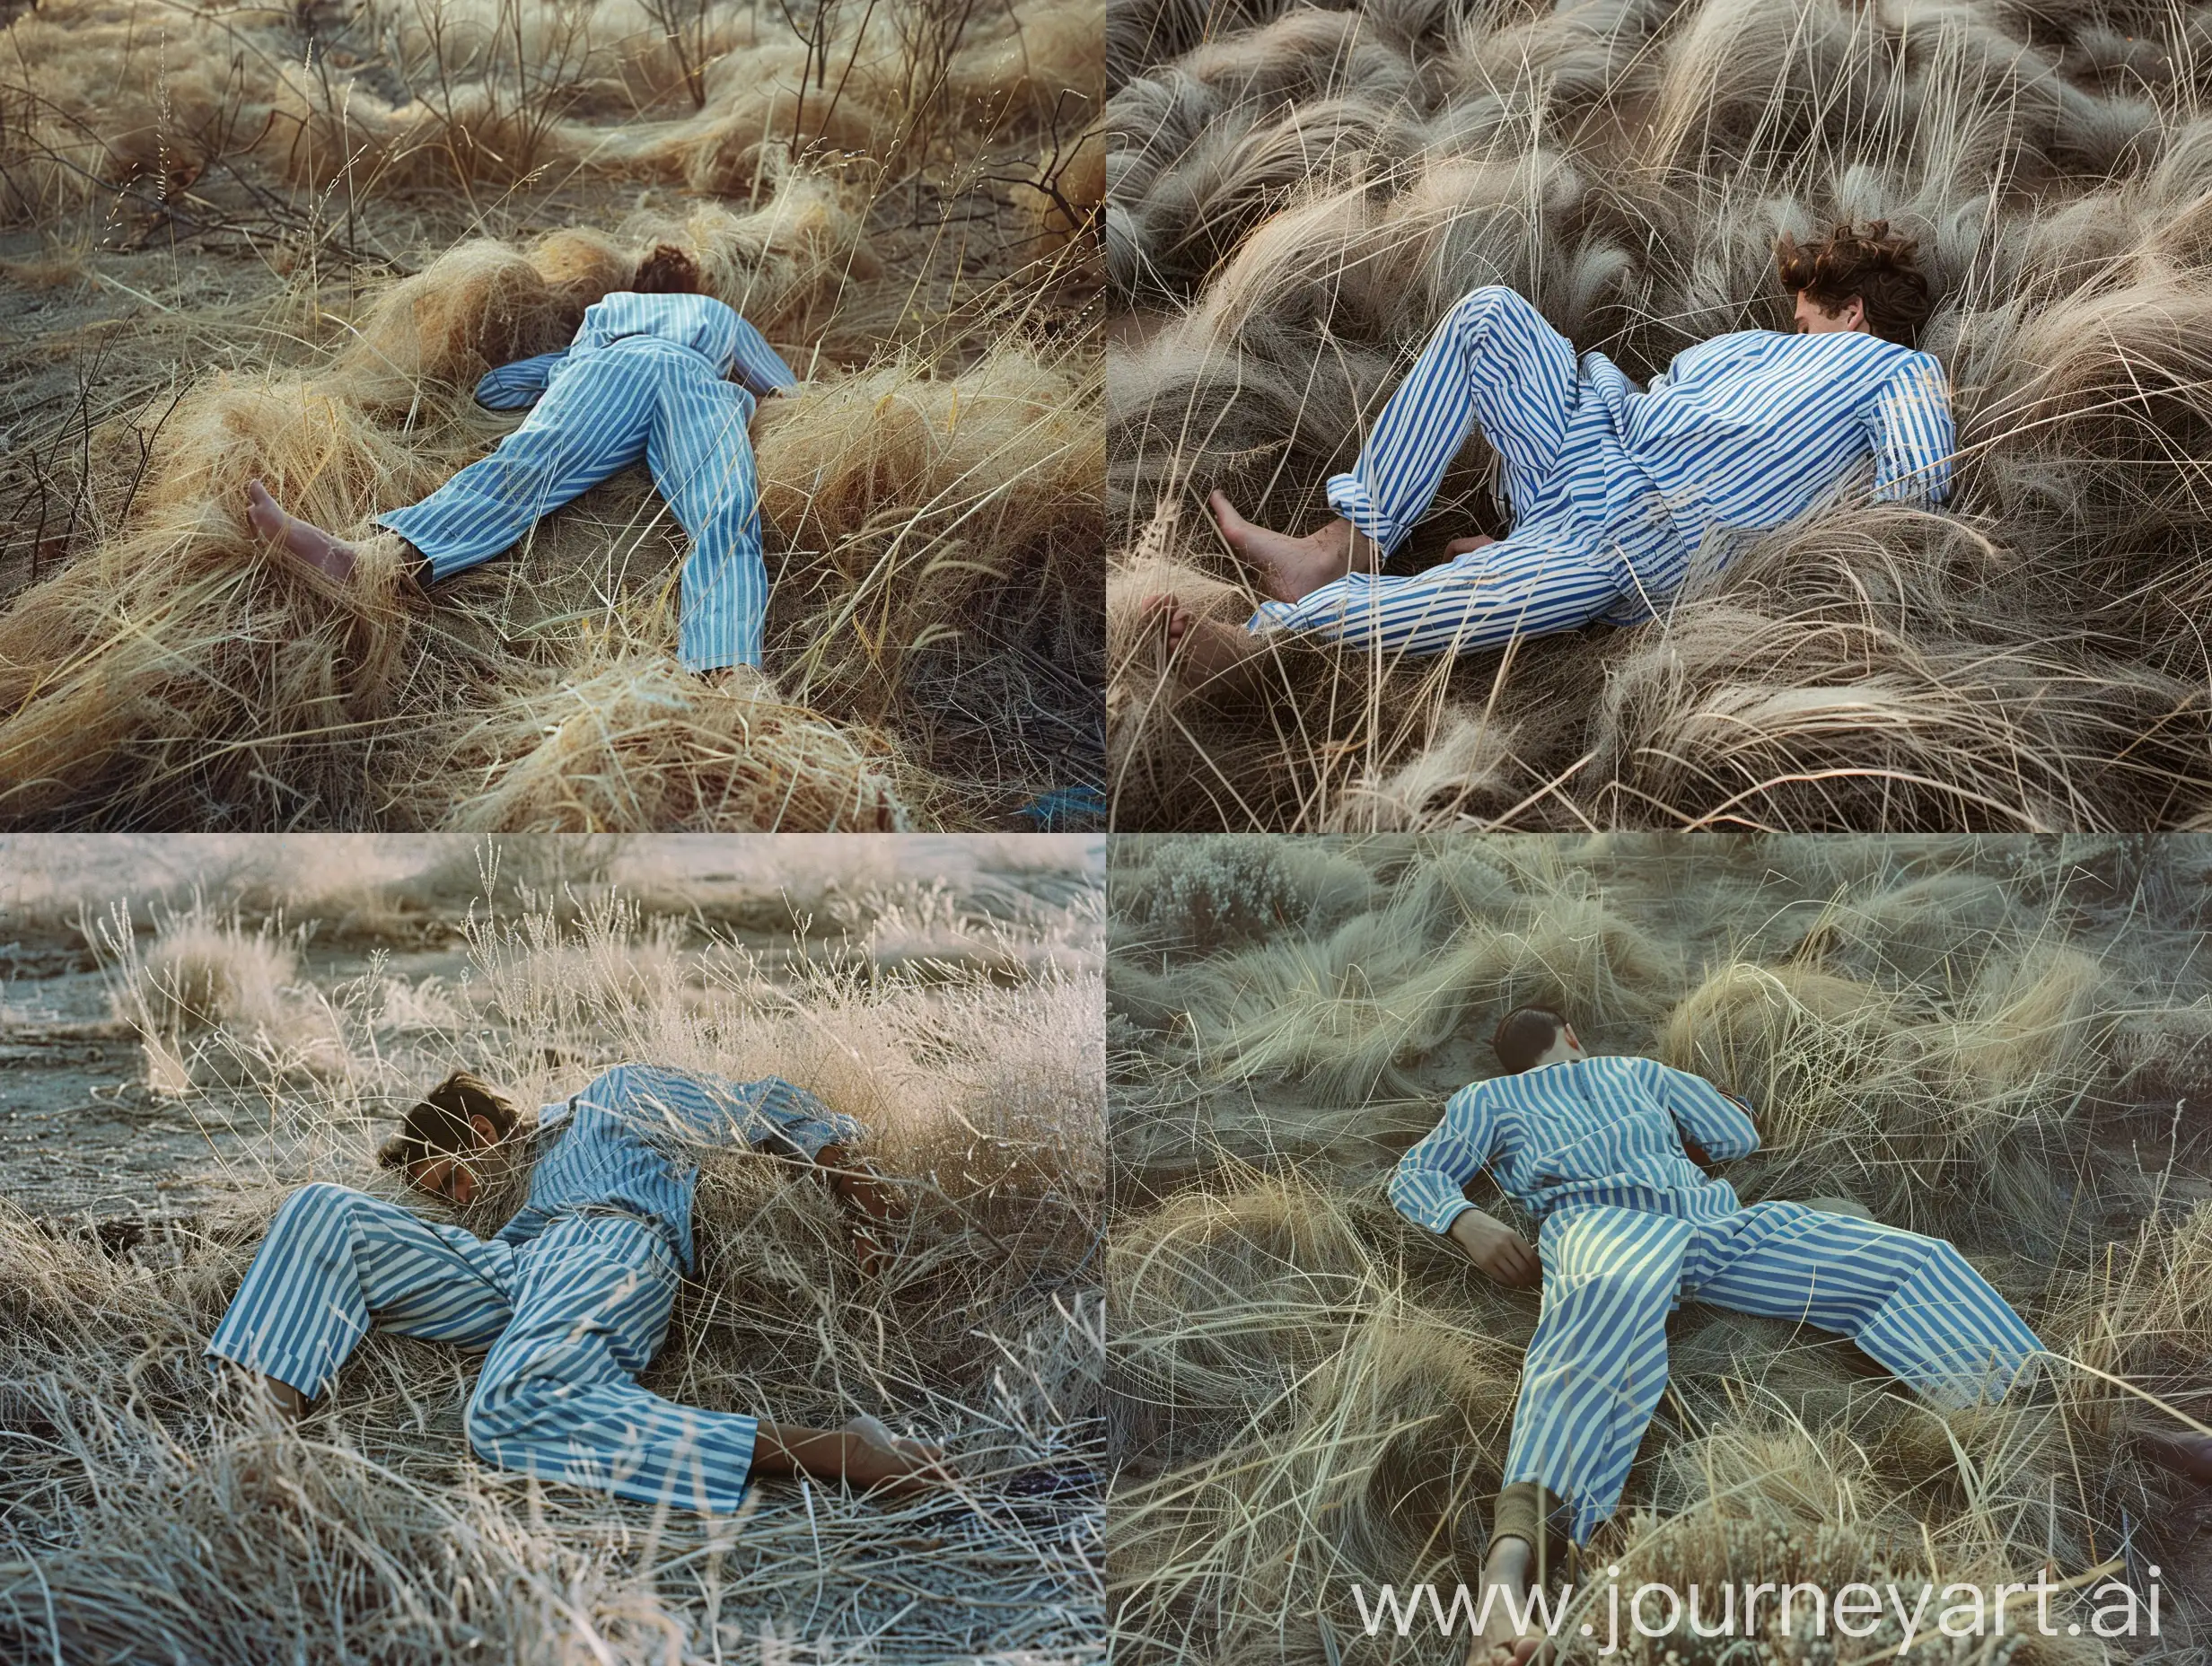 A man lying in the grass, surrounded by a lot of long barren grass, wearing a blue and white striped trouser shirt, disheveled, the shot in this picture is close to the legs